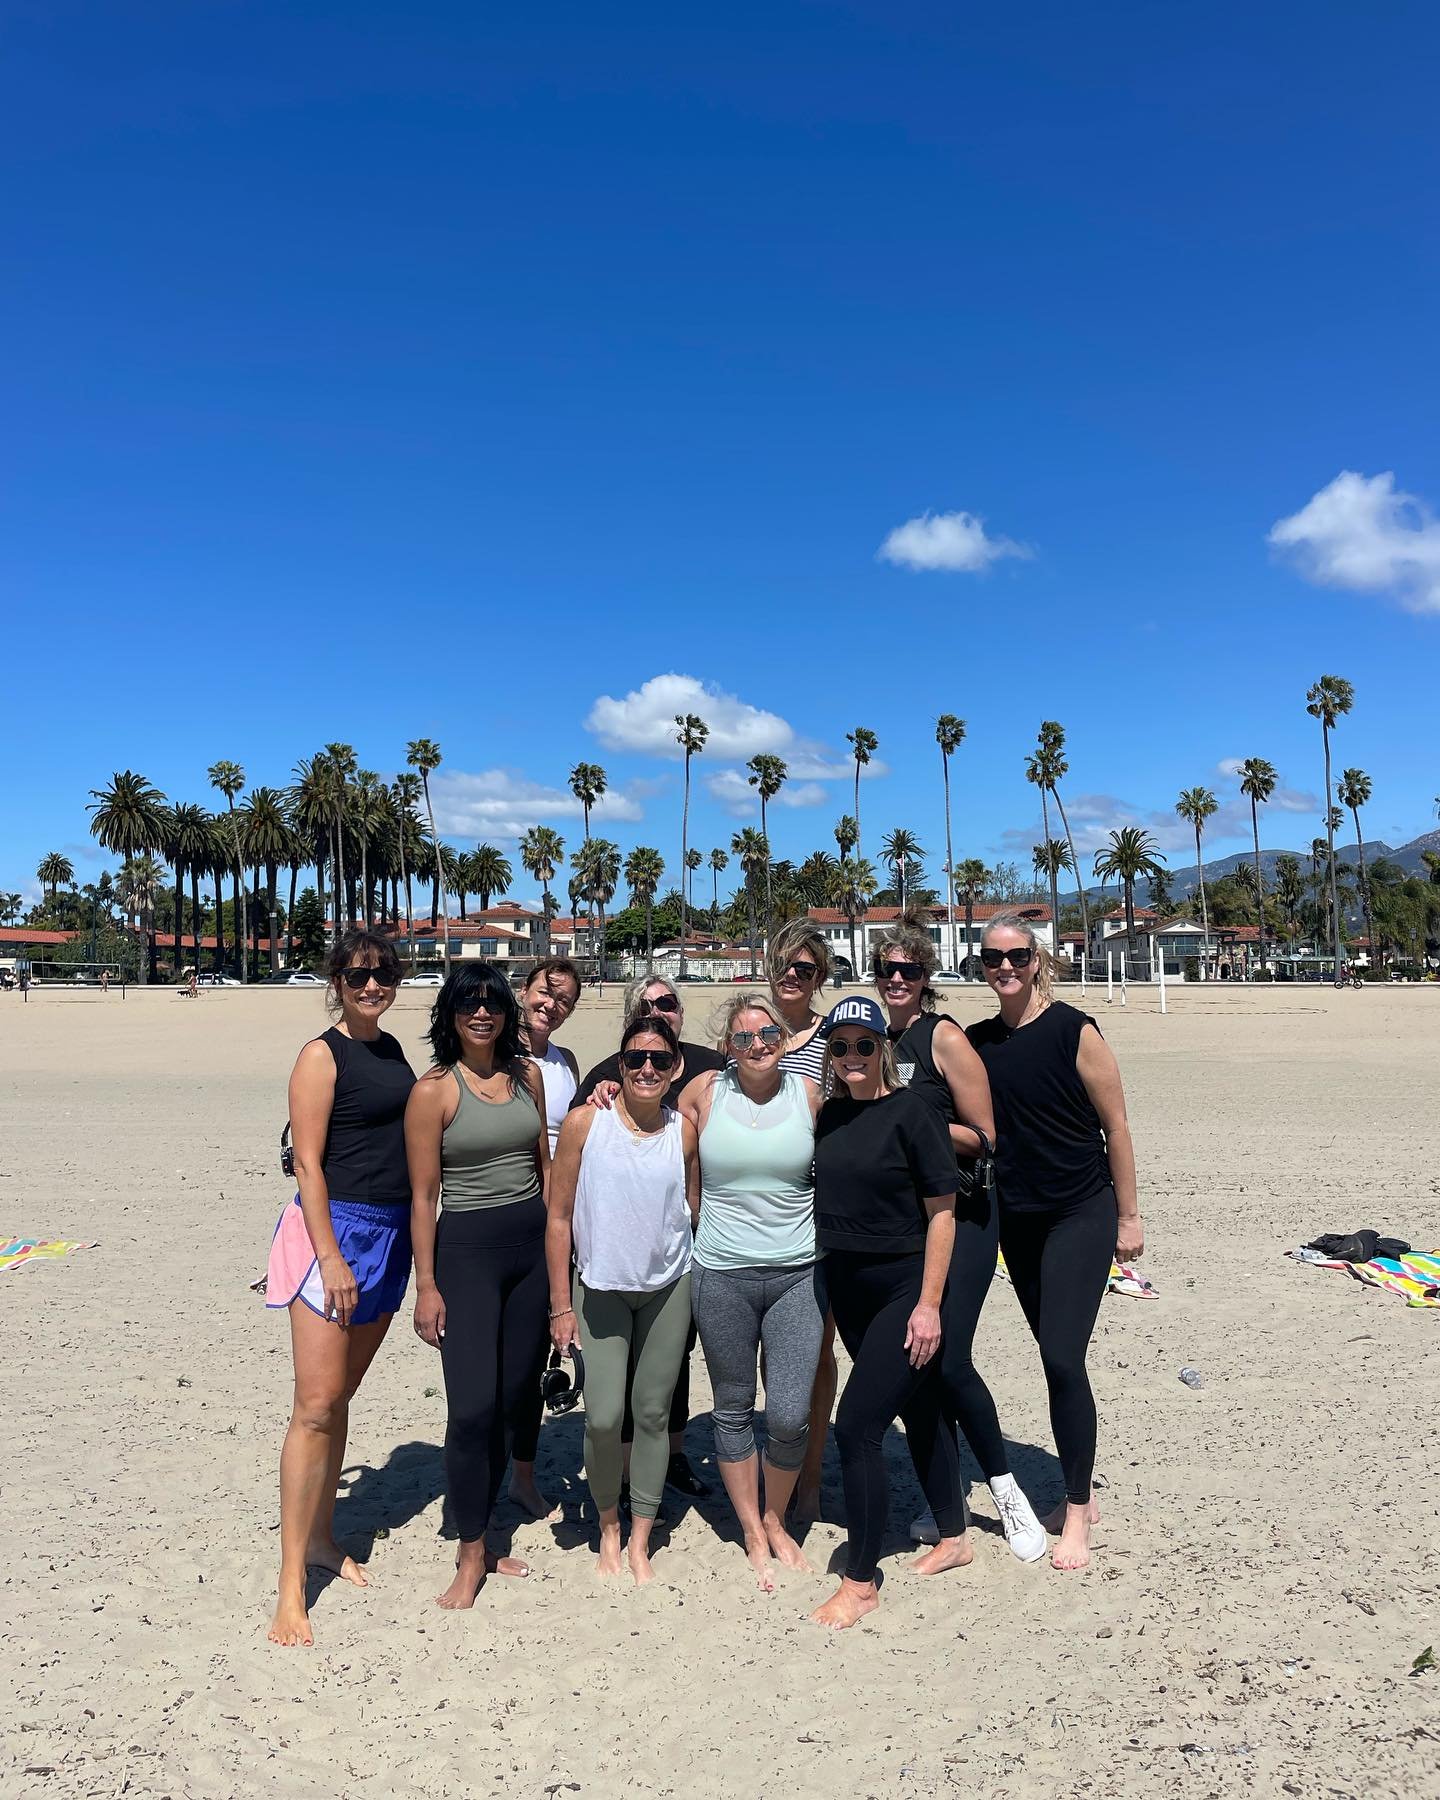 Lately at the Beach🏝️🌞&hellip;We led a personalized birthday Beach Yoga session for a lovely woman &amp; her best gals during their weekend getaway, honoring her 50th trip around the sun.💫

We&rsquo;re thrilled to be a part of the vibrant Wellness